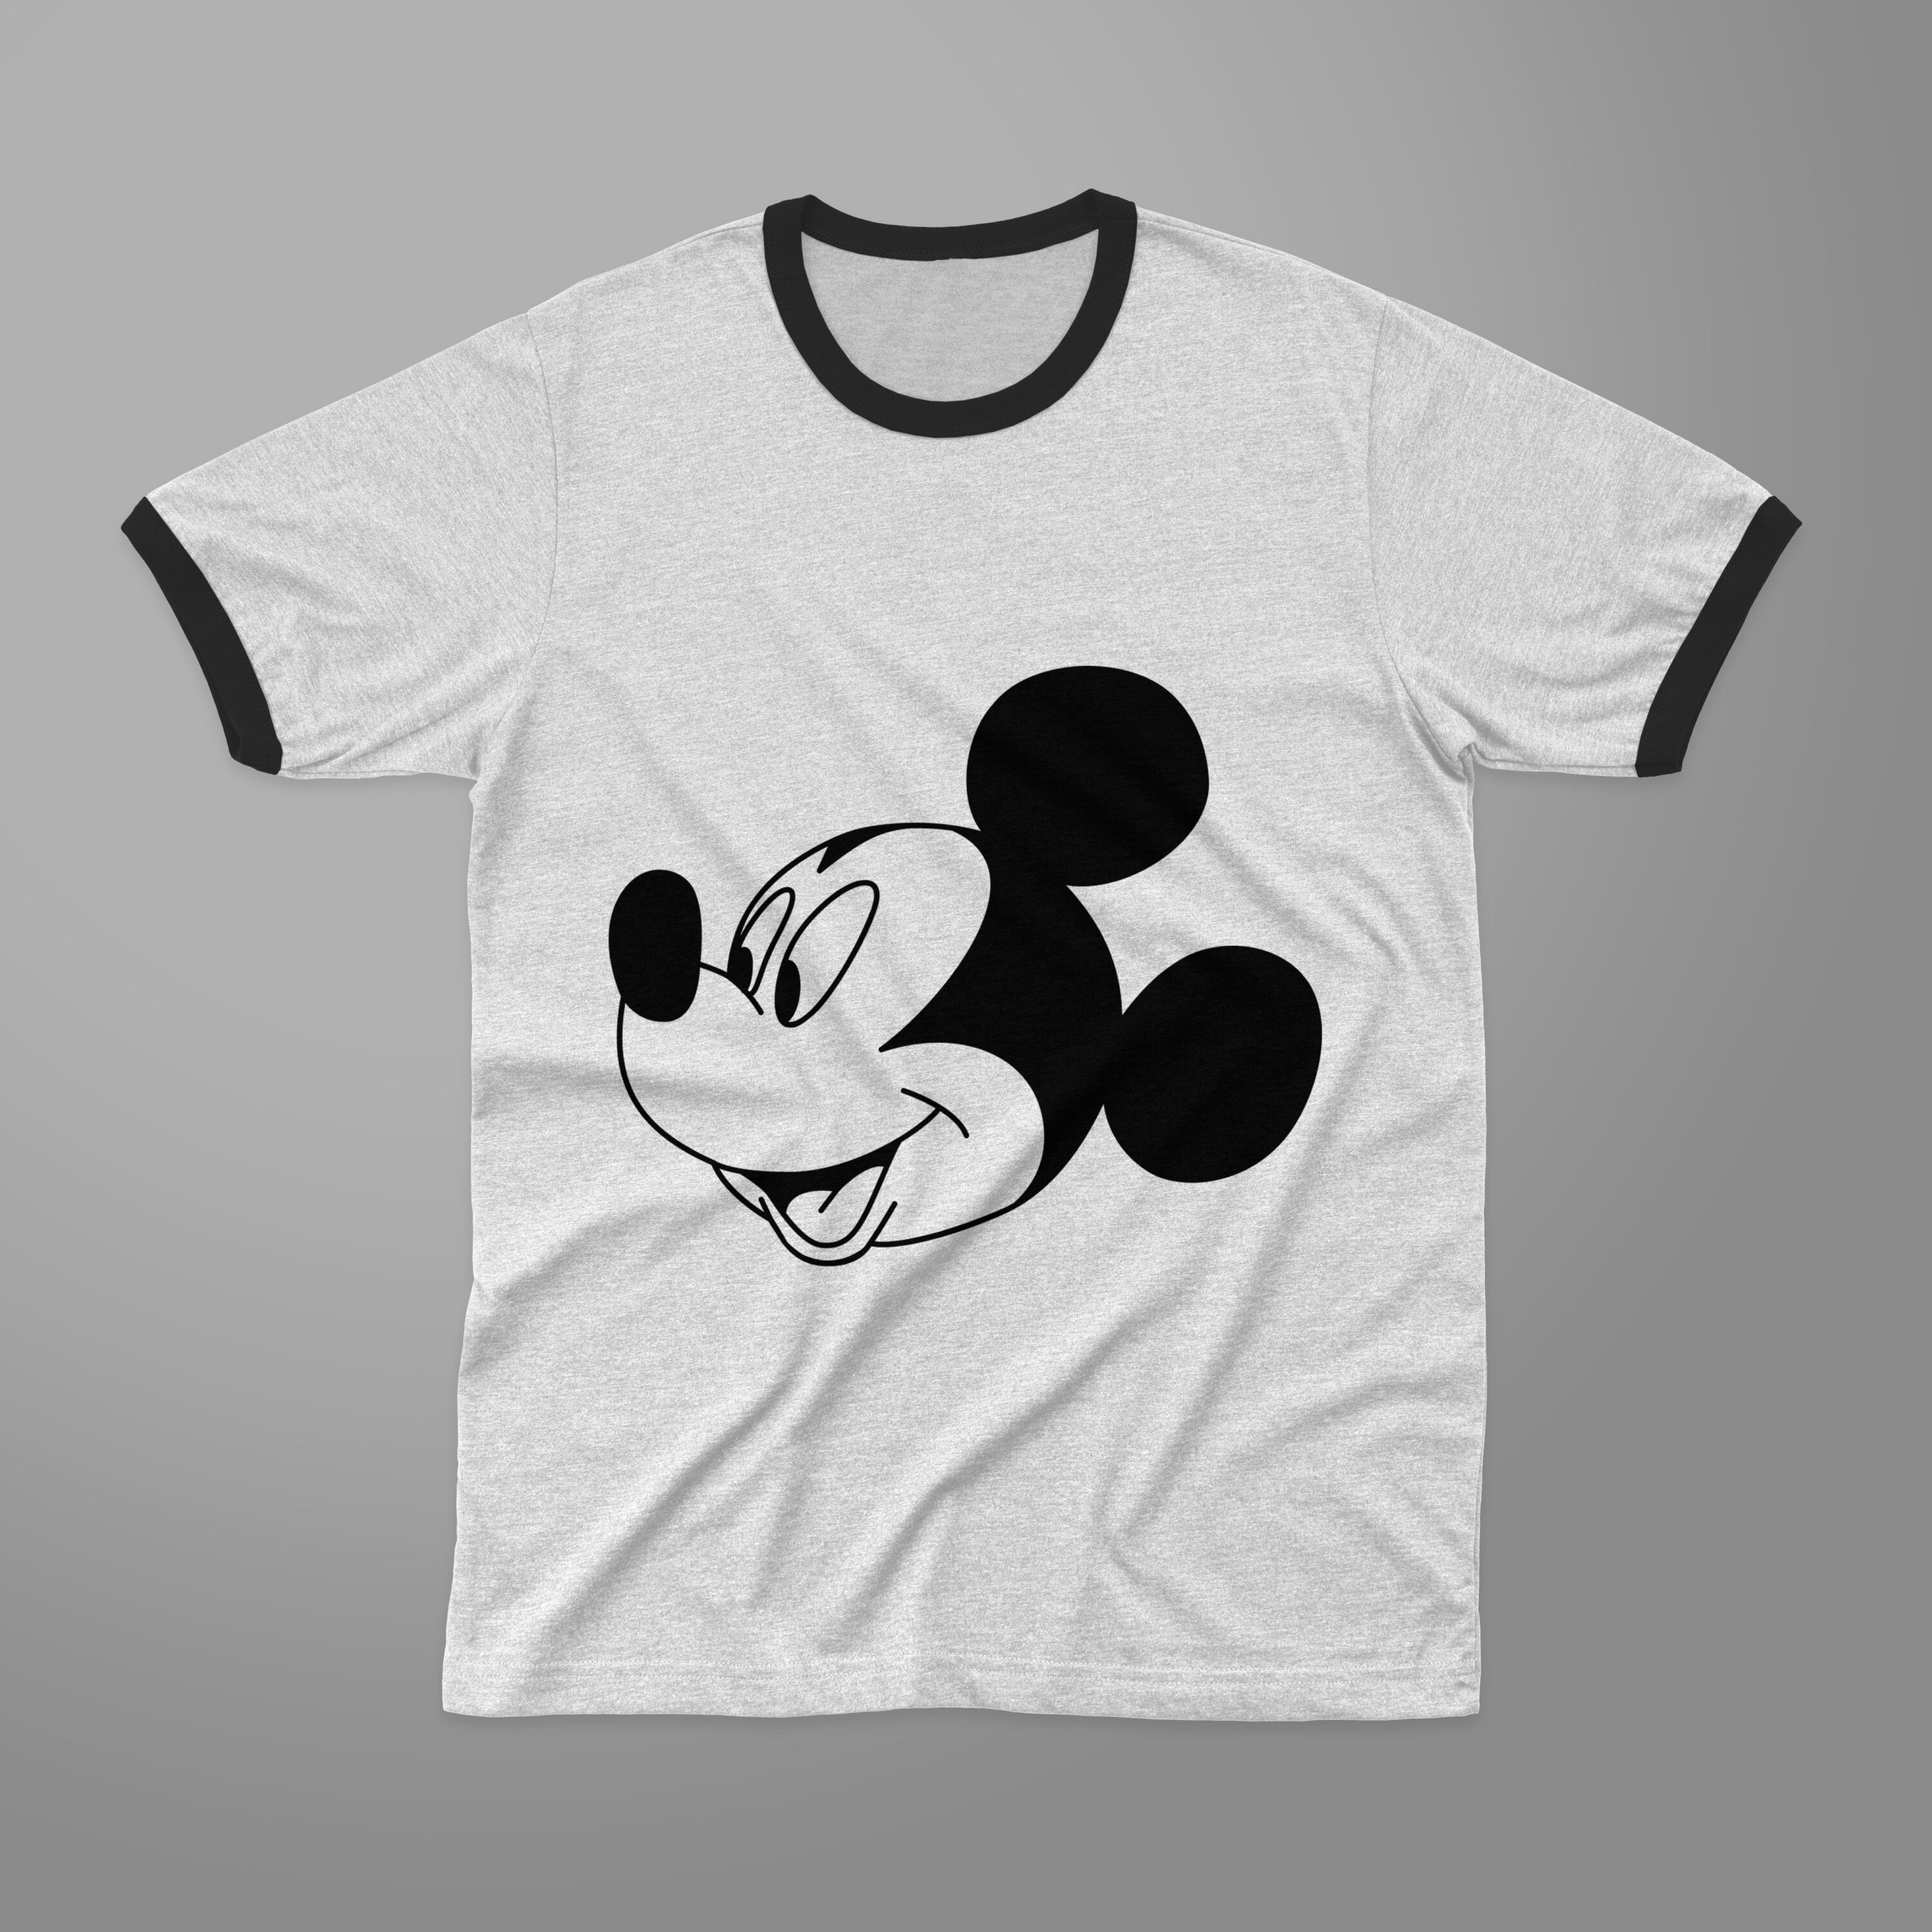 Add the disney vibe to your brand.